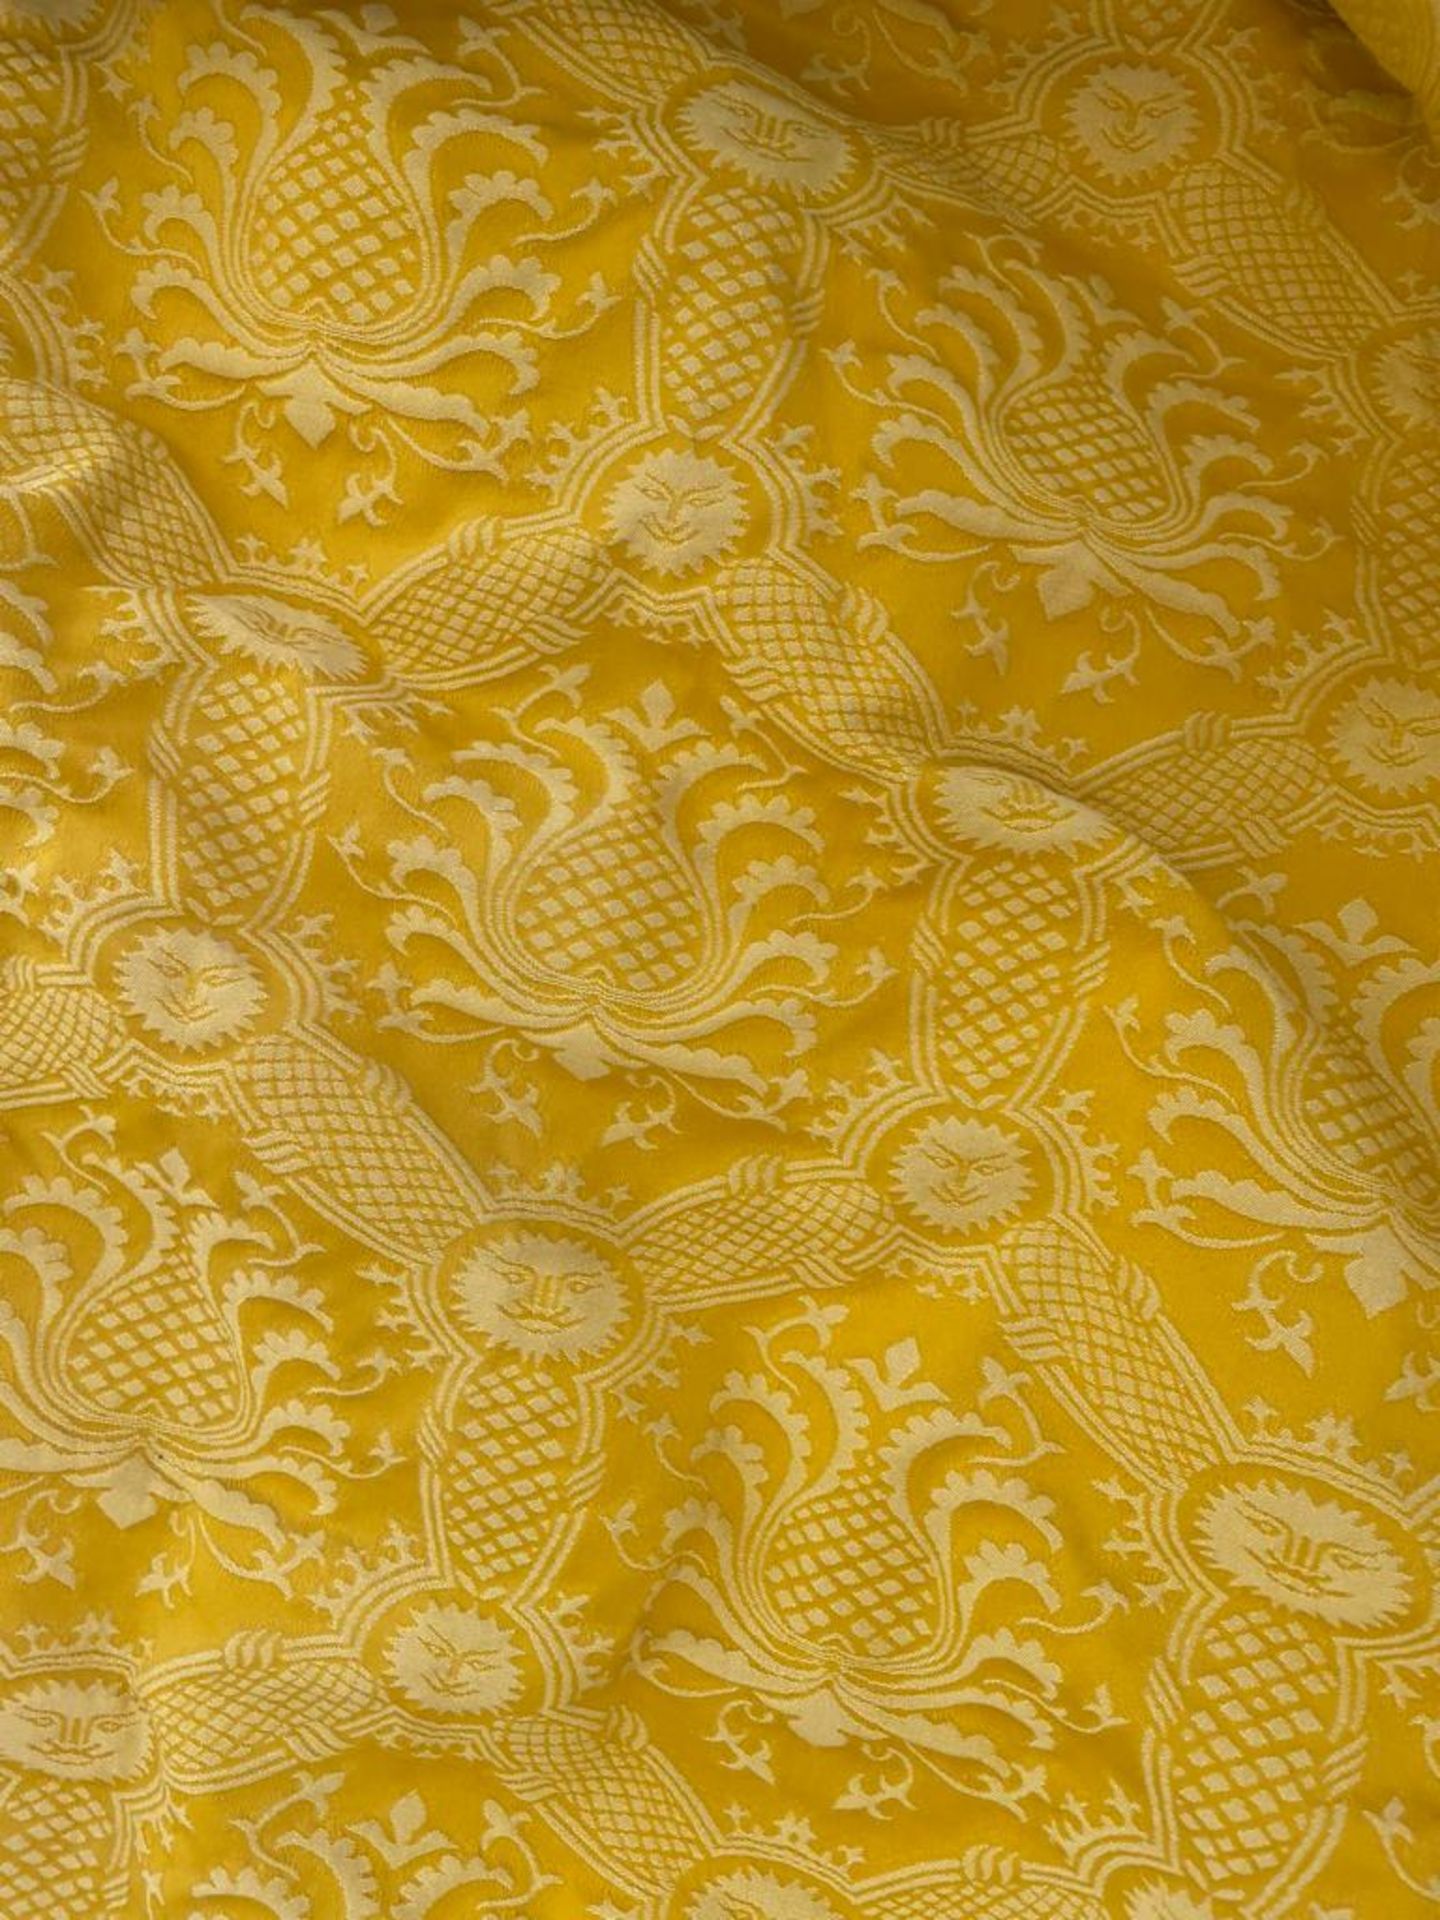 1 x Pair of Embroided Fabric Curtains With Liner - Features a Sun God Design in Yellow - NO VAT ON